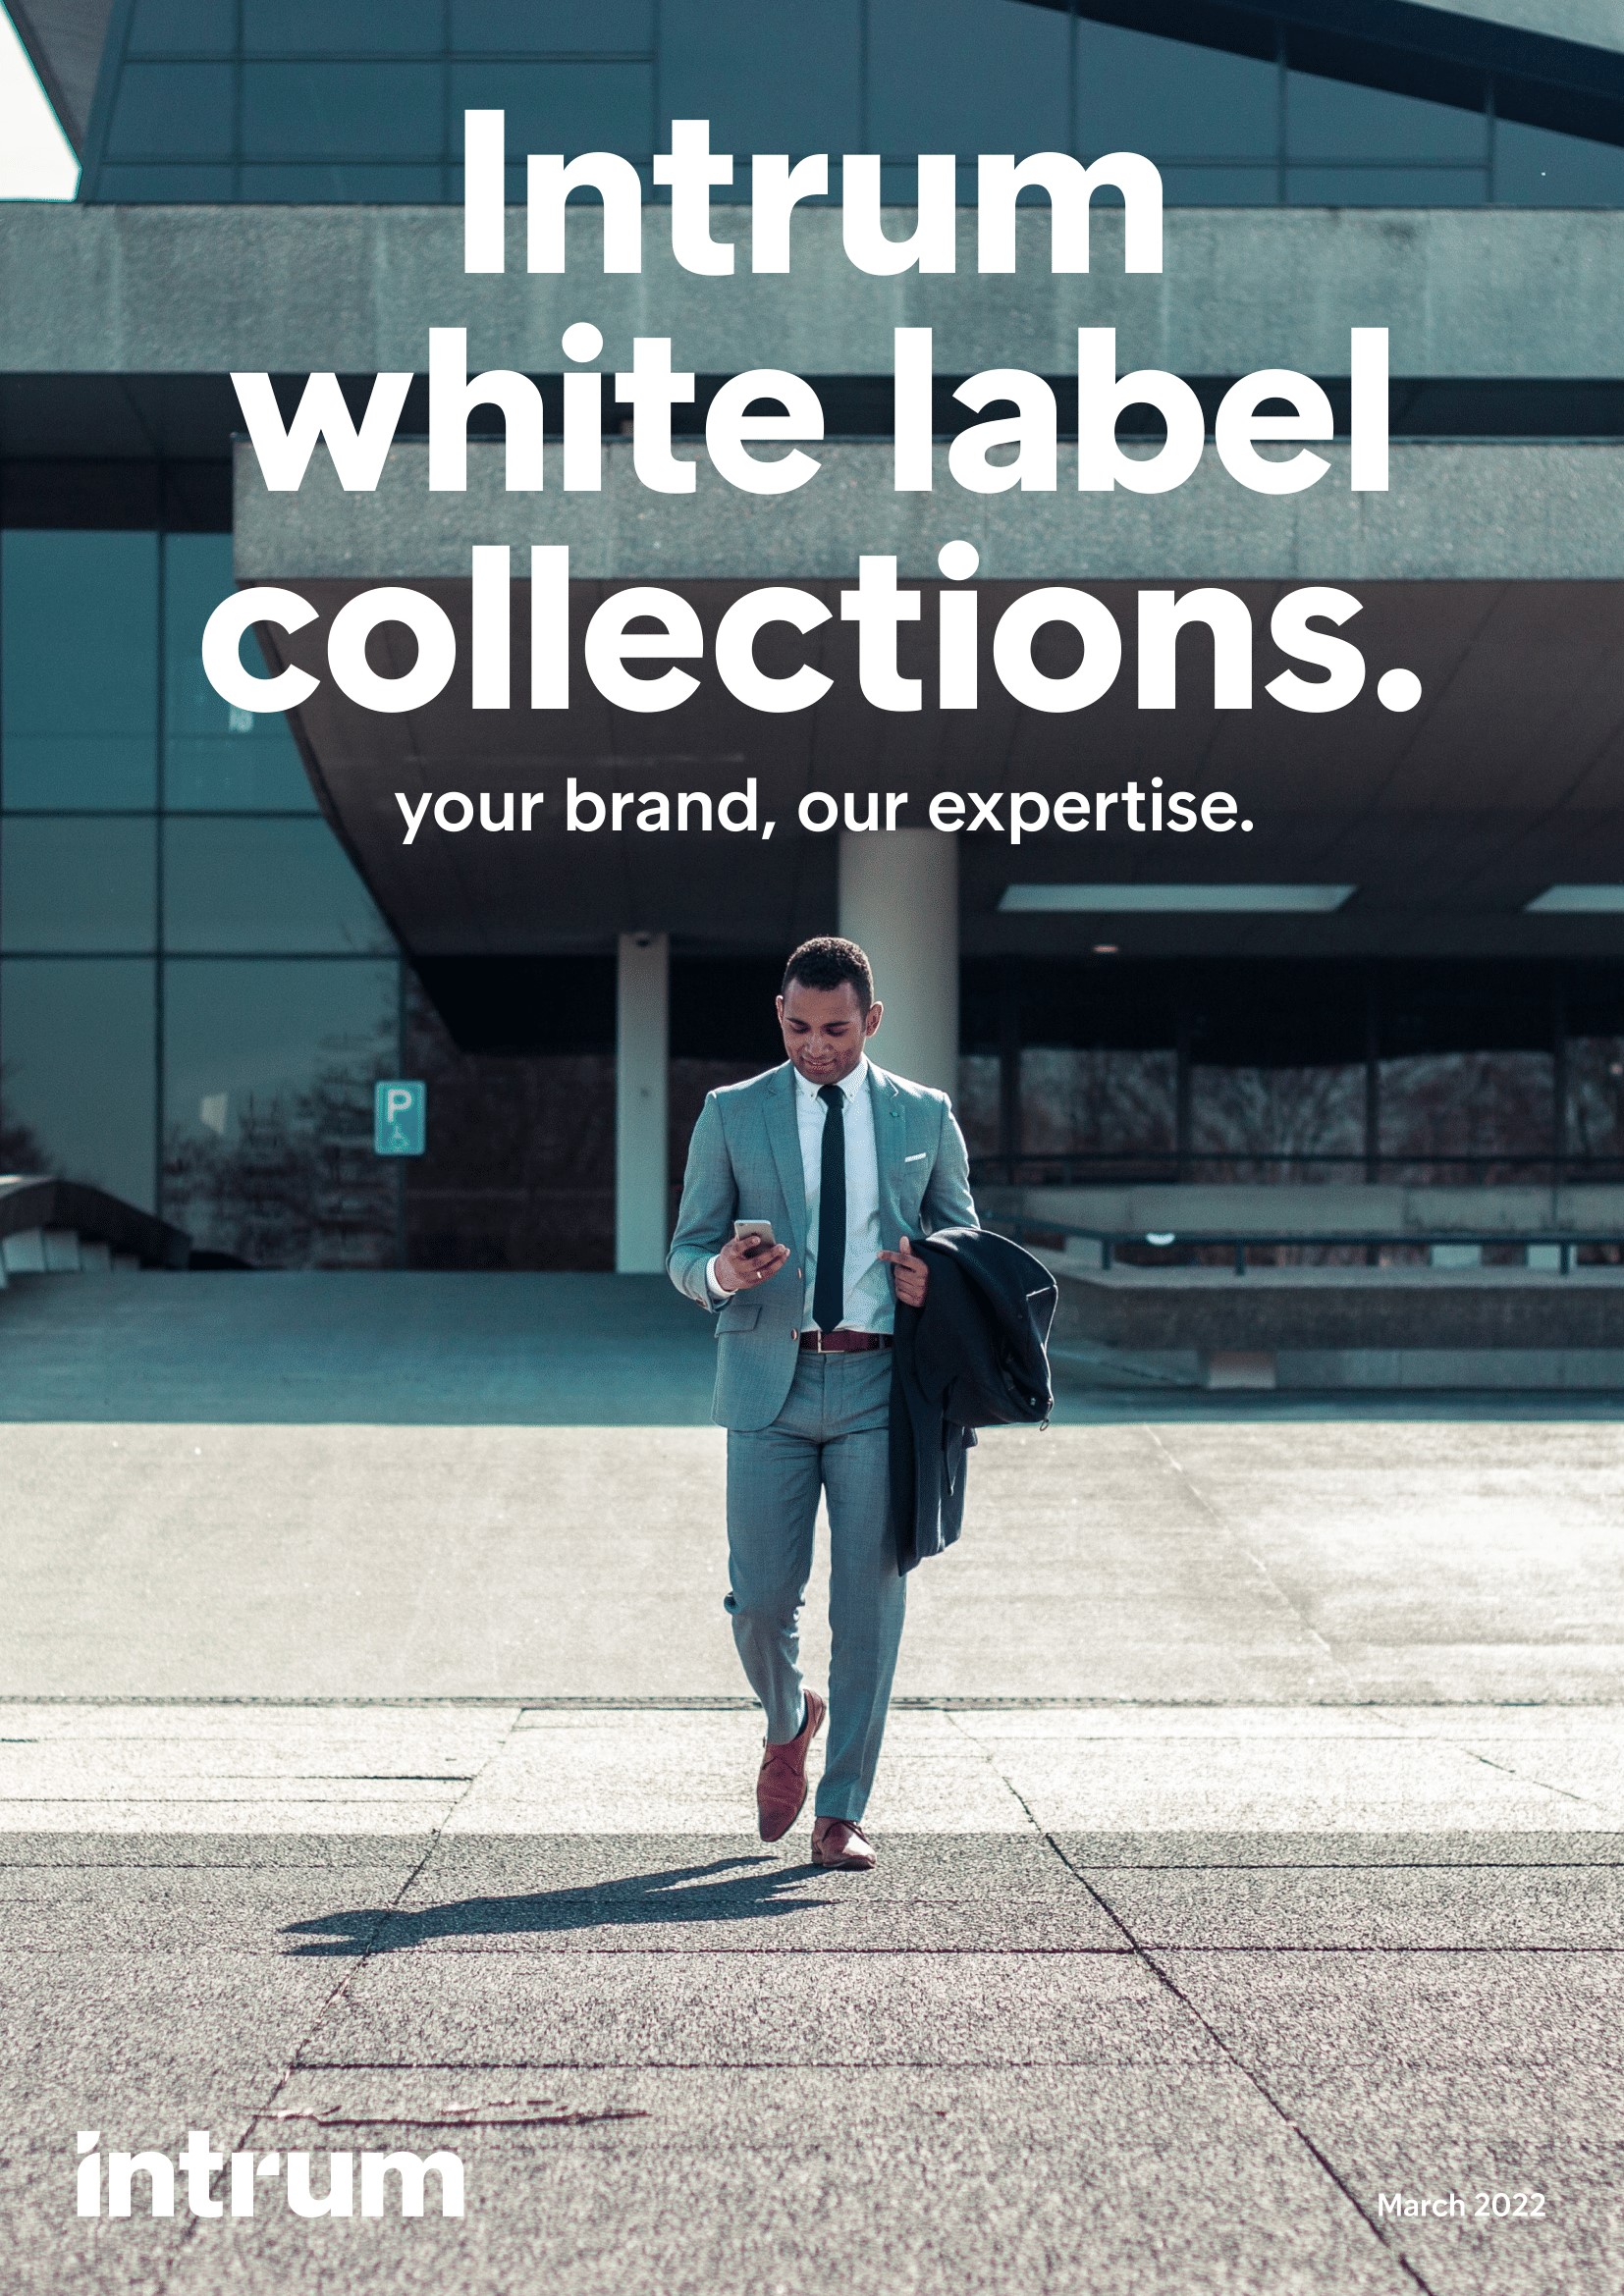 White Label Collections by Intrum